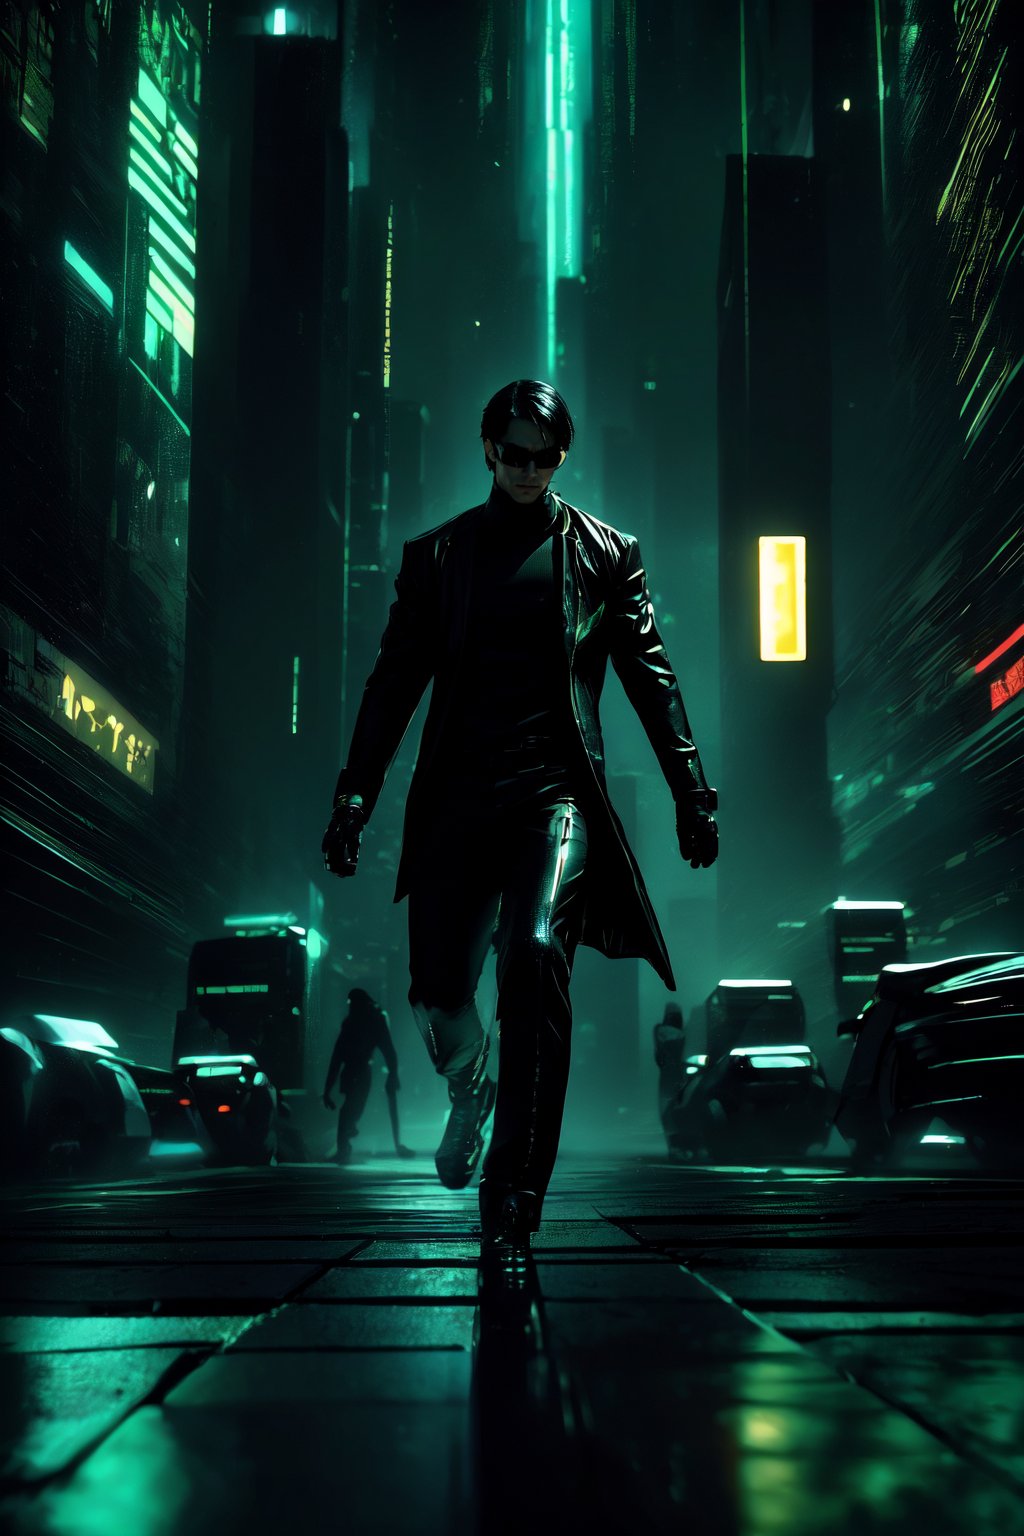 high-definition, dynamic, action-packed, 
1man, Matrix style, leaping, mid-air, all-black suit, black glasses, athletic build, intense expression, 
((depth of field)), urban skyline, futuristic cityscape, dark ambiance, digital code rain, neon lights, gorgeous movements, Code matrix cascading from top to bottom, by FuturEvoLab, 
gravity-defying, cyberpunk atmosphere, surreal, digital world, ,Edge feathering and holy light,Cyberpunk